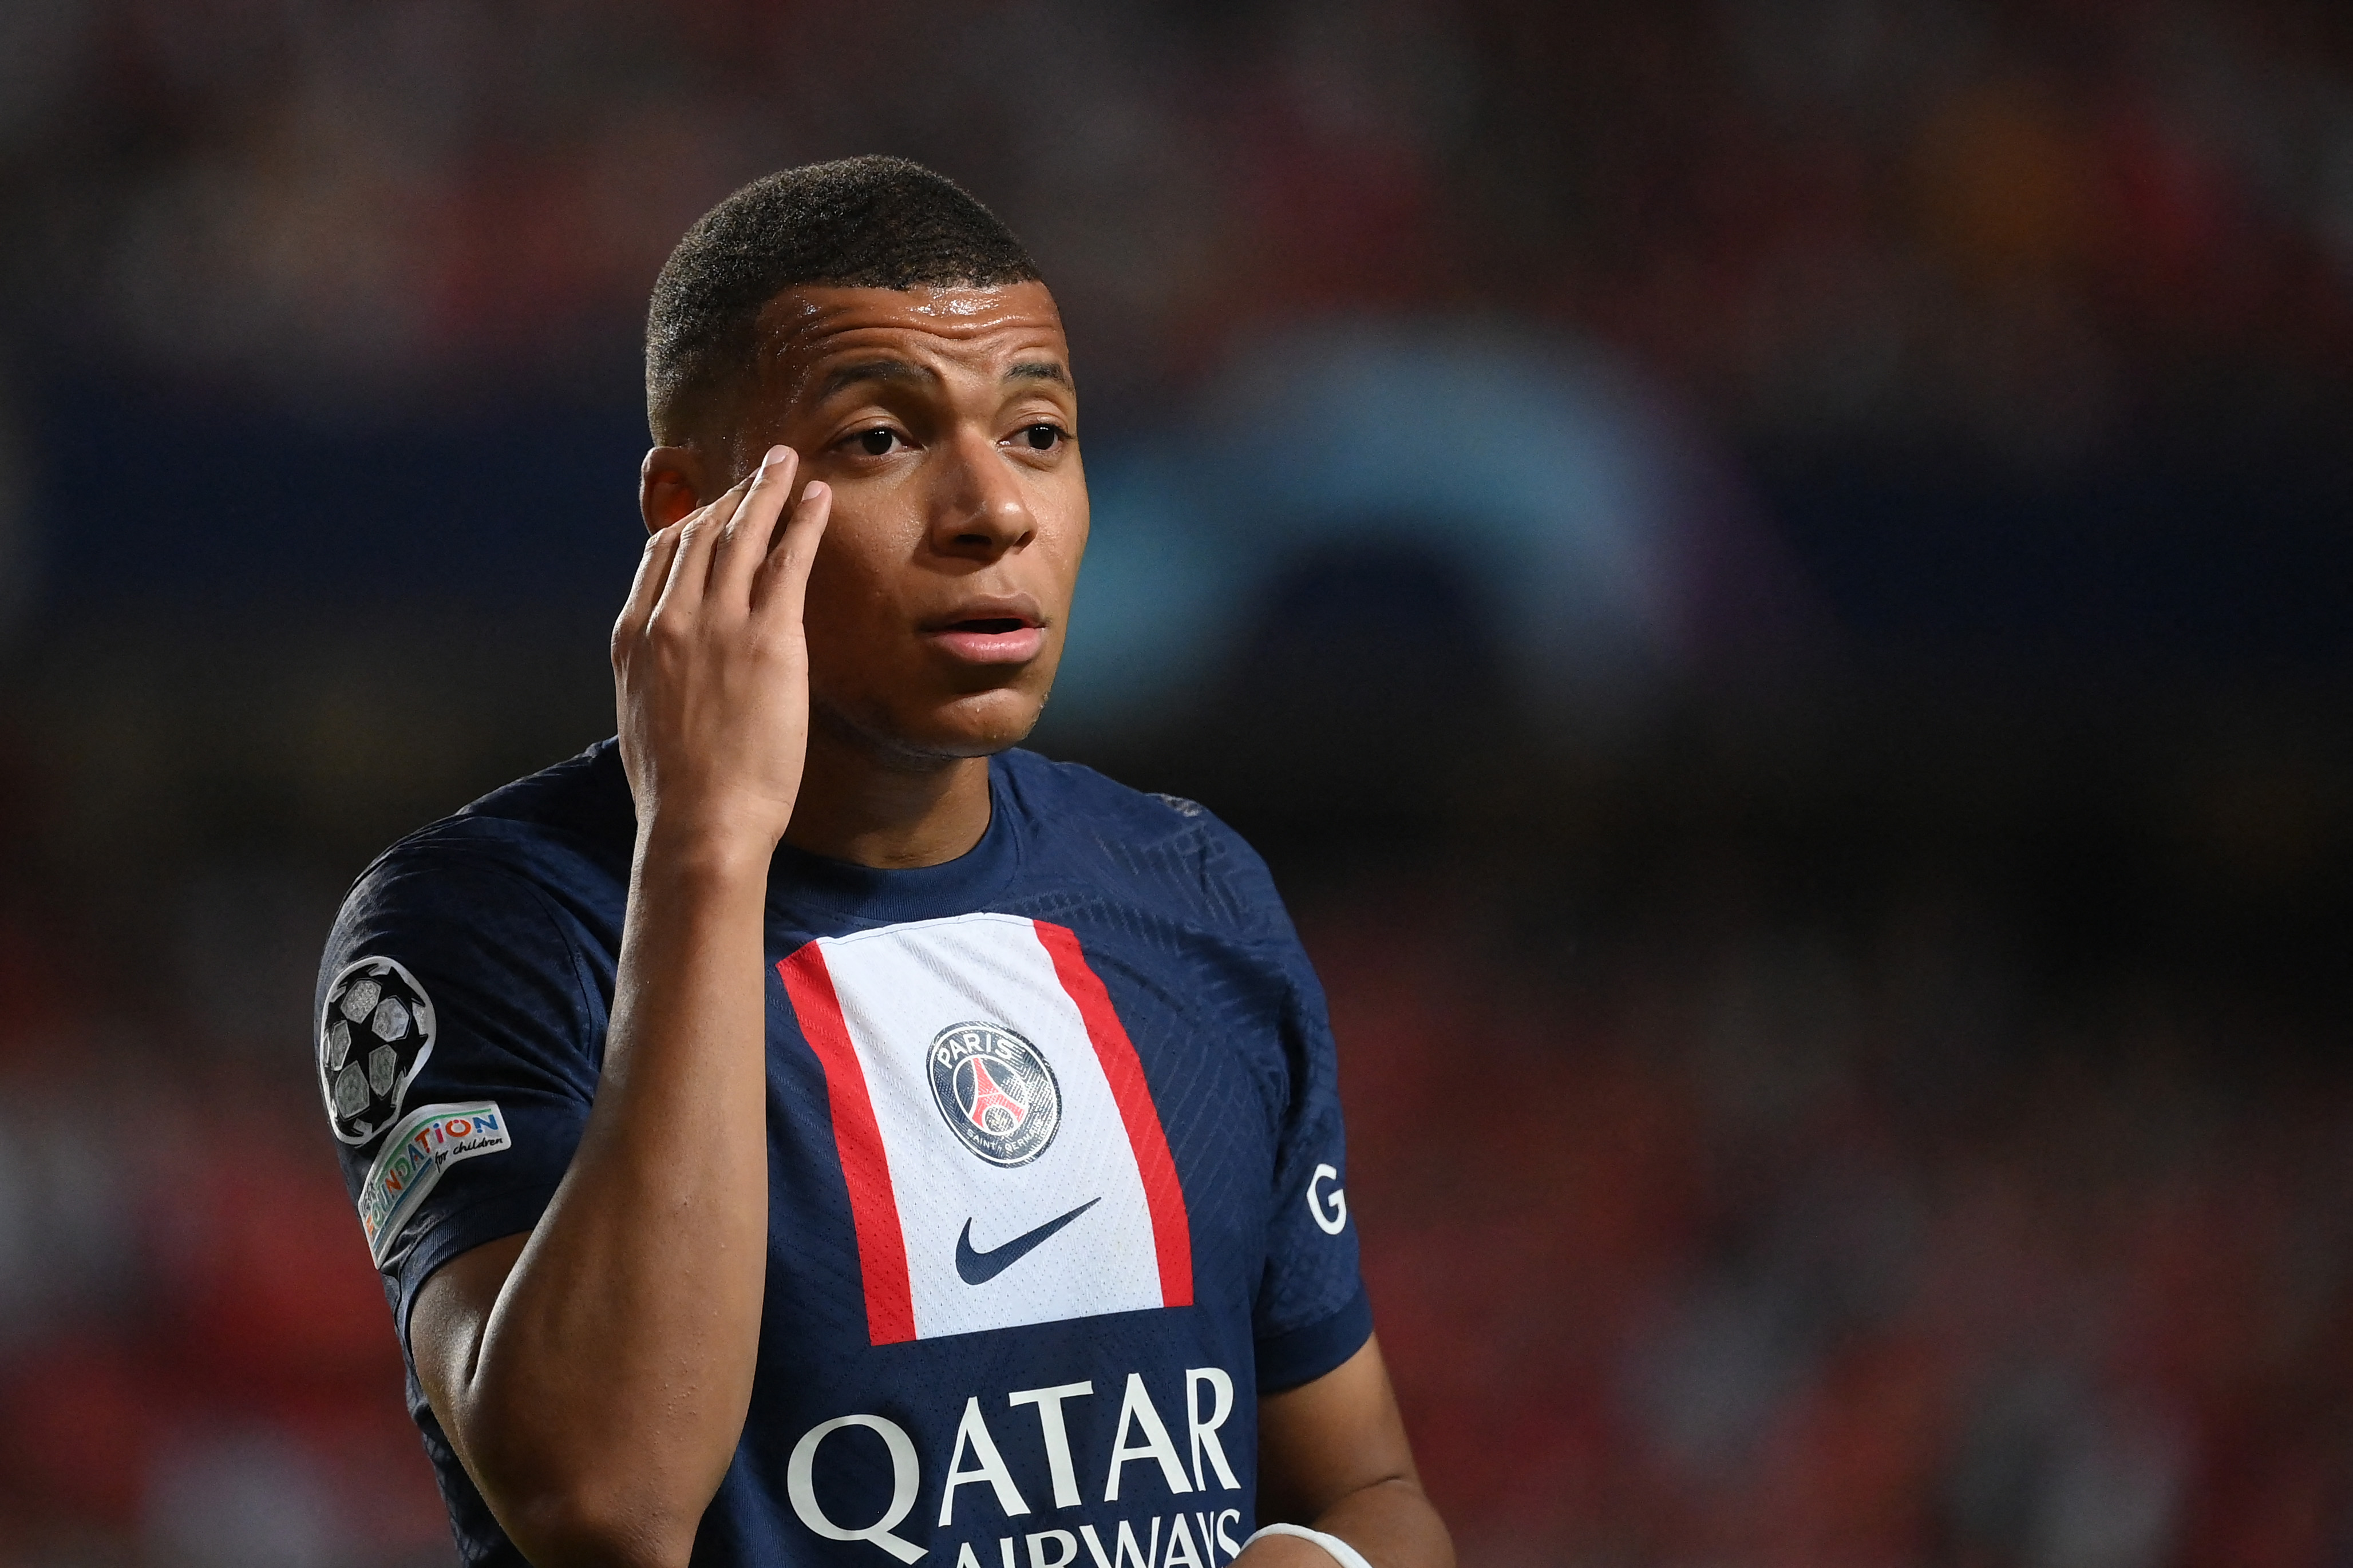 “Our position is clear” – PSG president hints at Kylian Mbappe exit this summer CaughtOffside